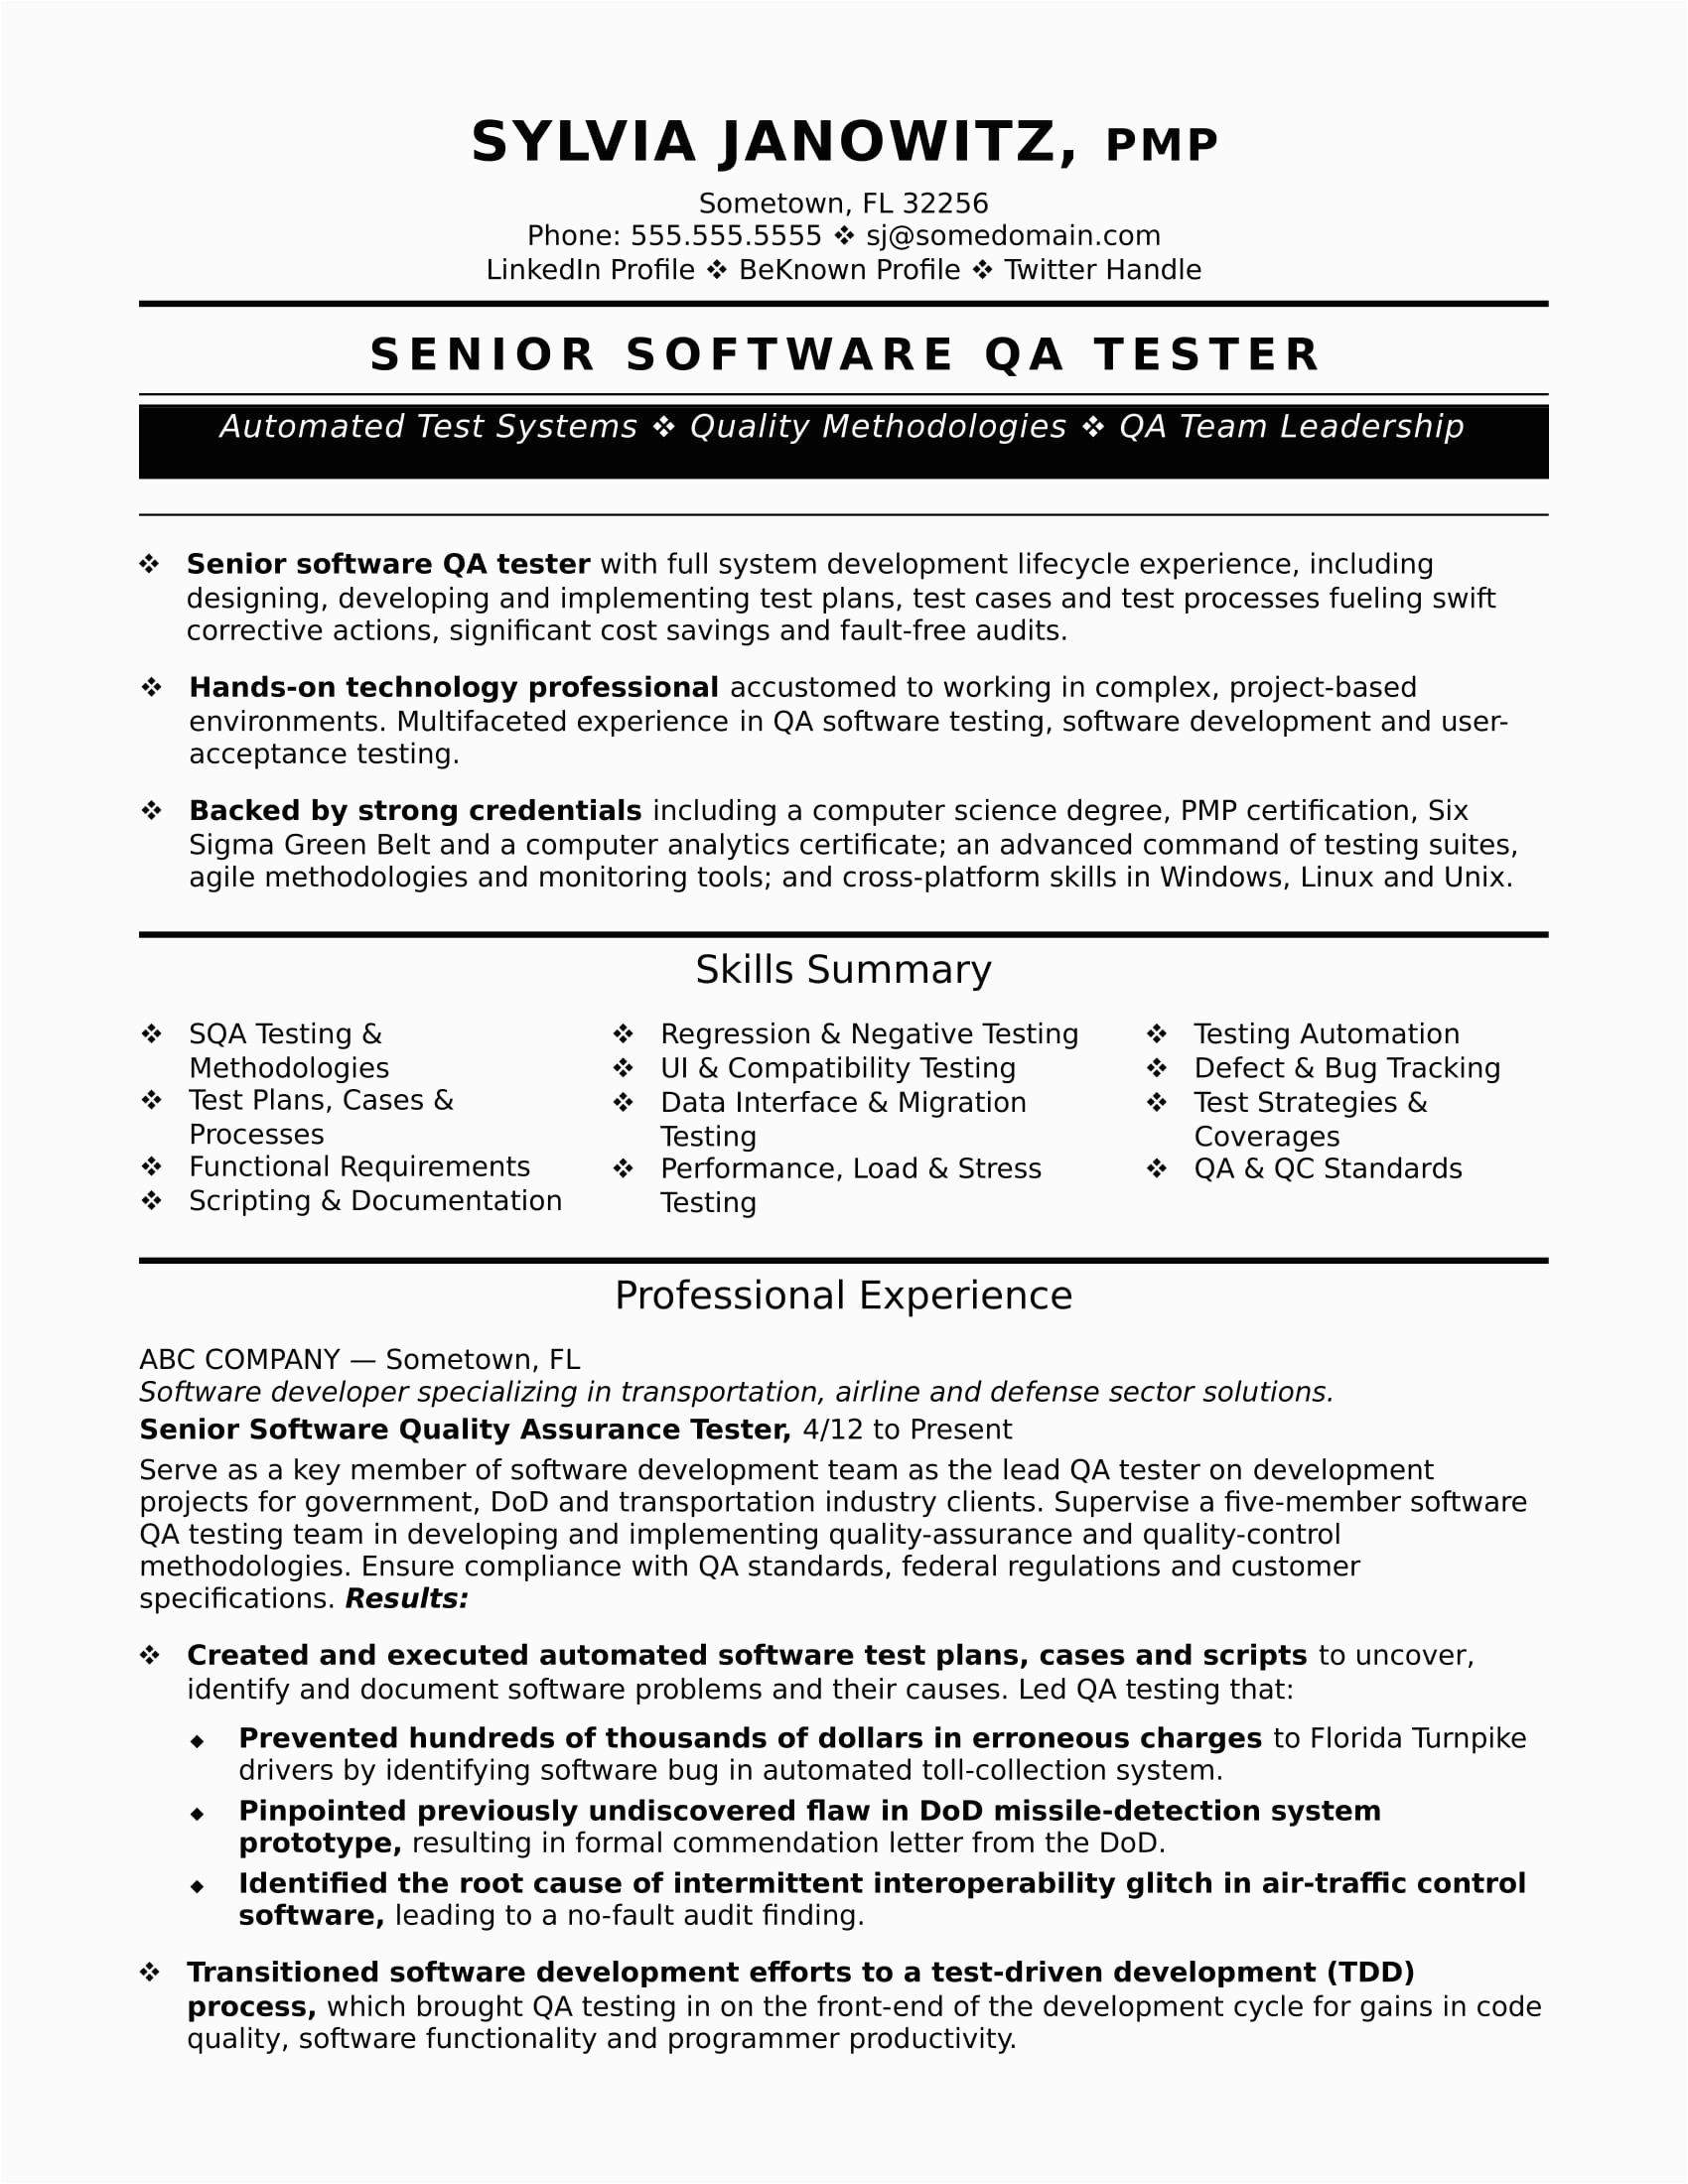 Sample Resume for 1.5 Years Experience Download Manual Testing Resume Sample for 5 Years